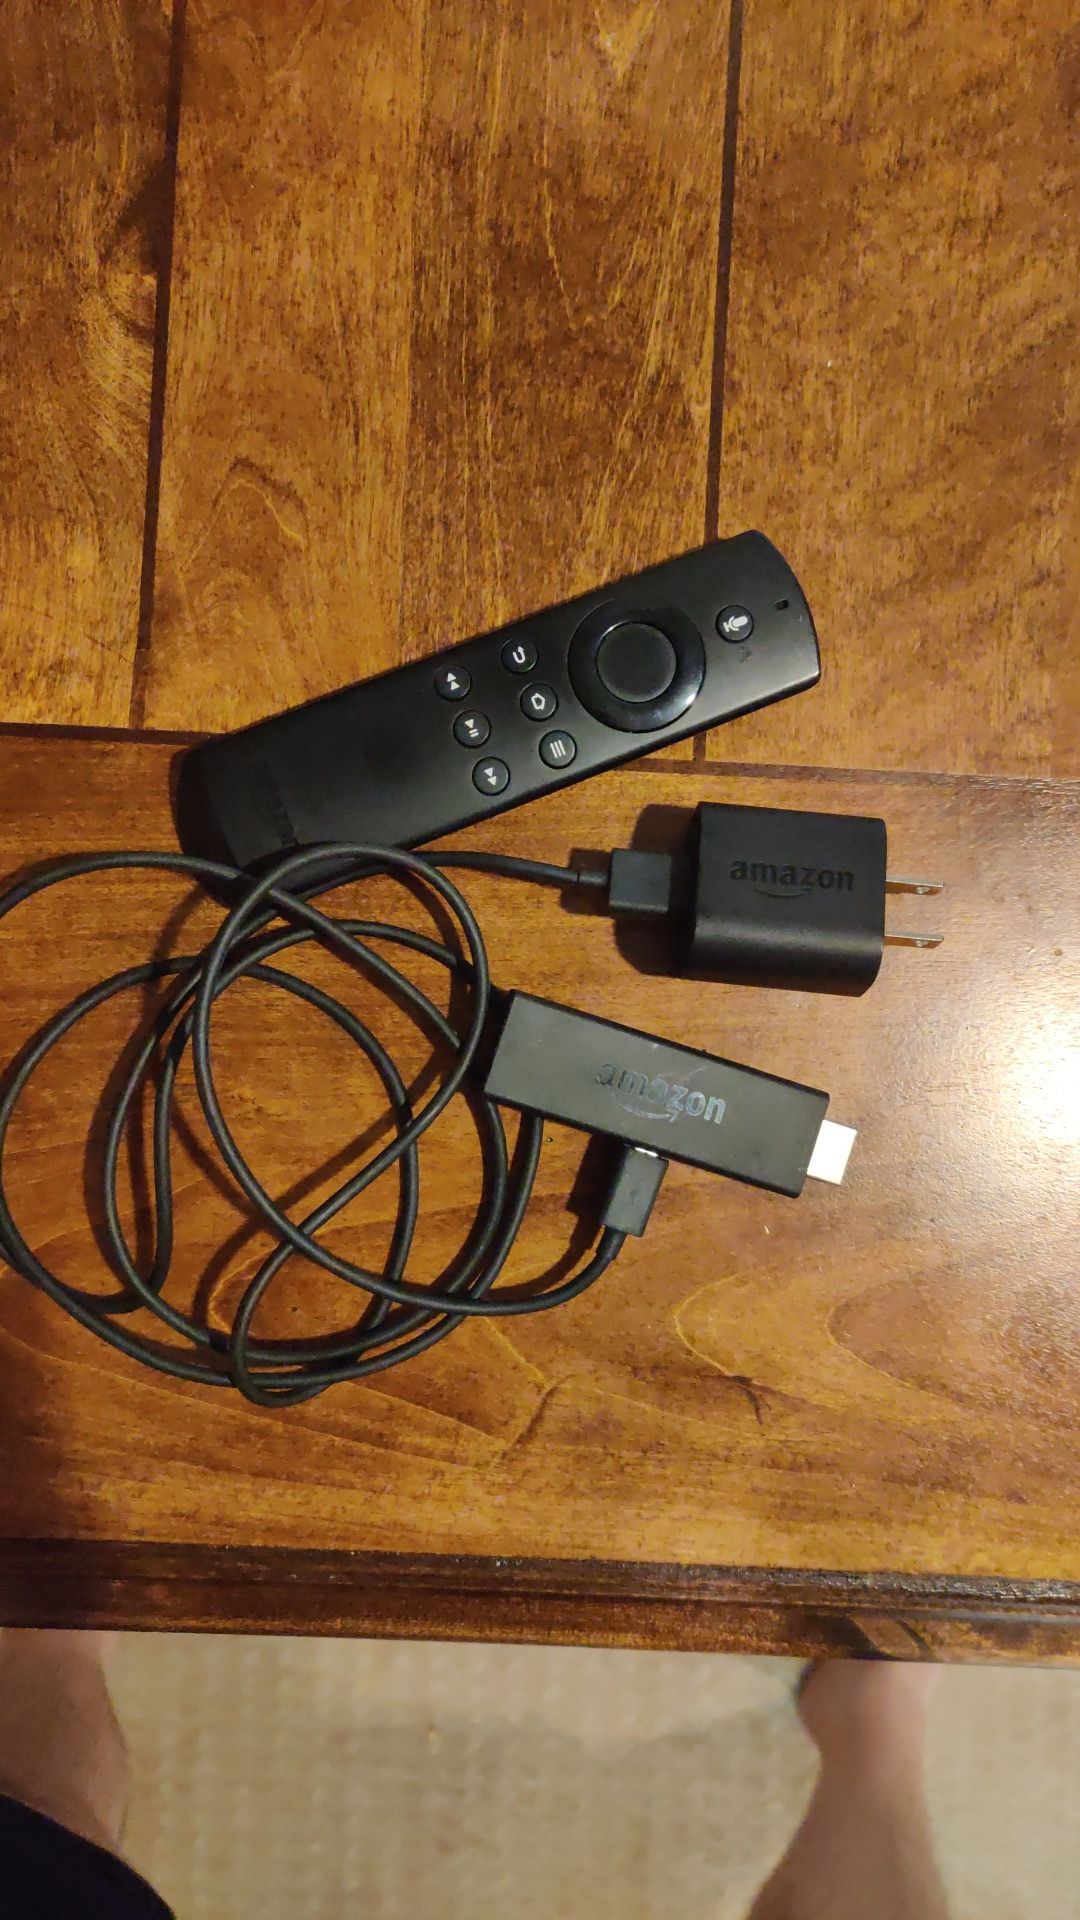 Fire tv stick with microphone remote. Factory reset and ready to load